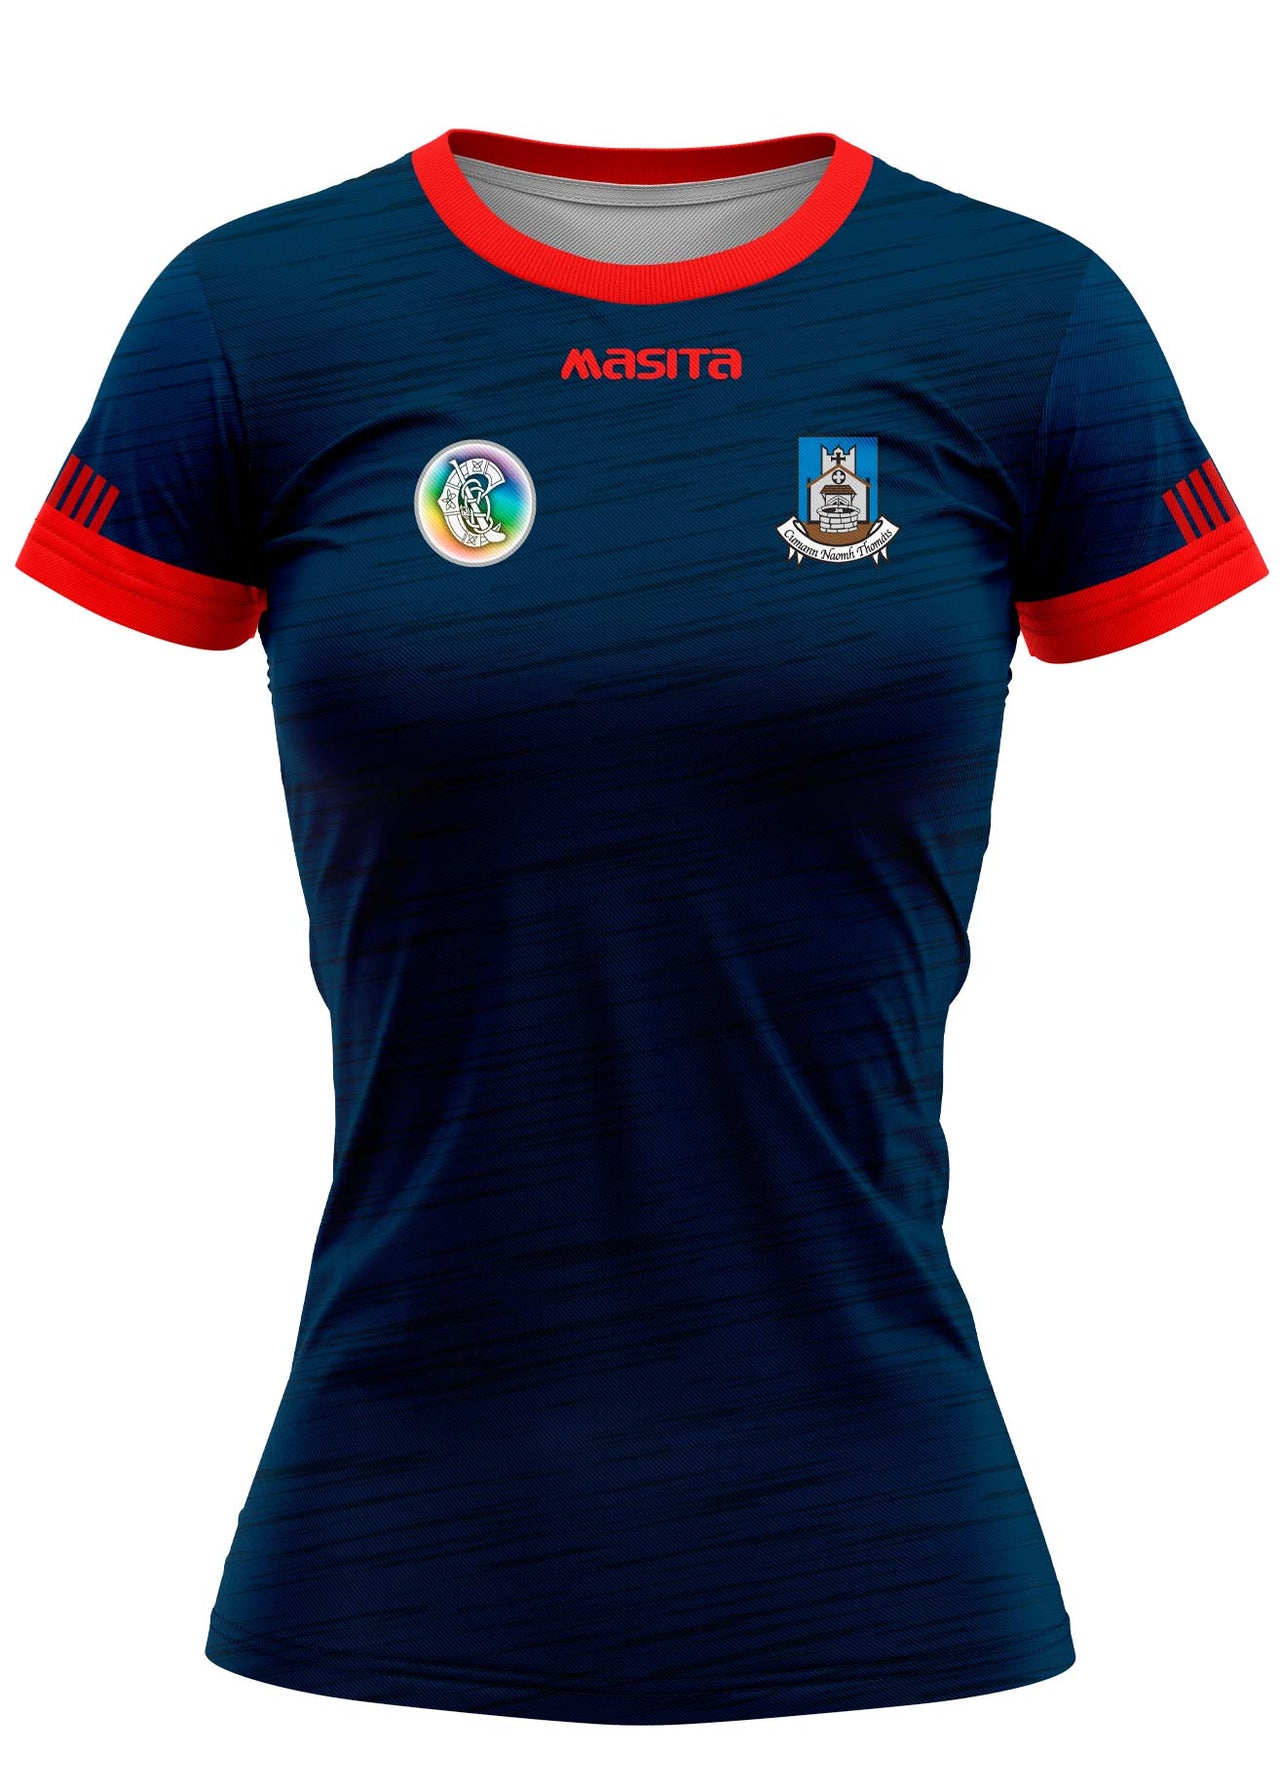 St Thomas' Camogie Baltimore Style Training Jersey Regular Fit Adult